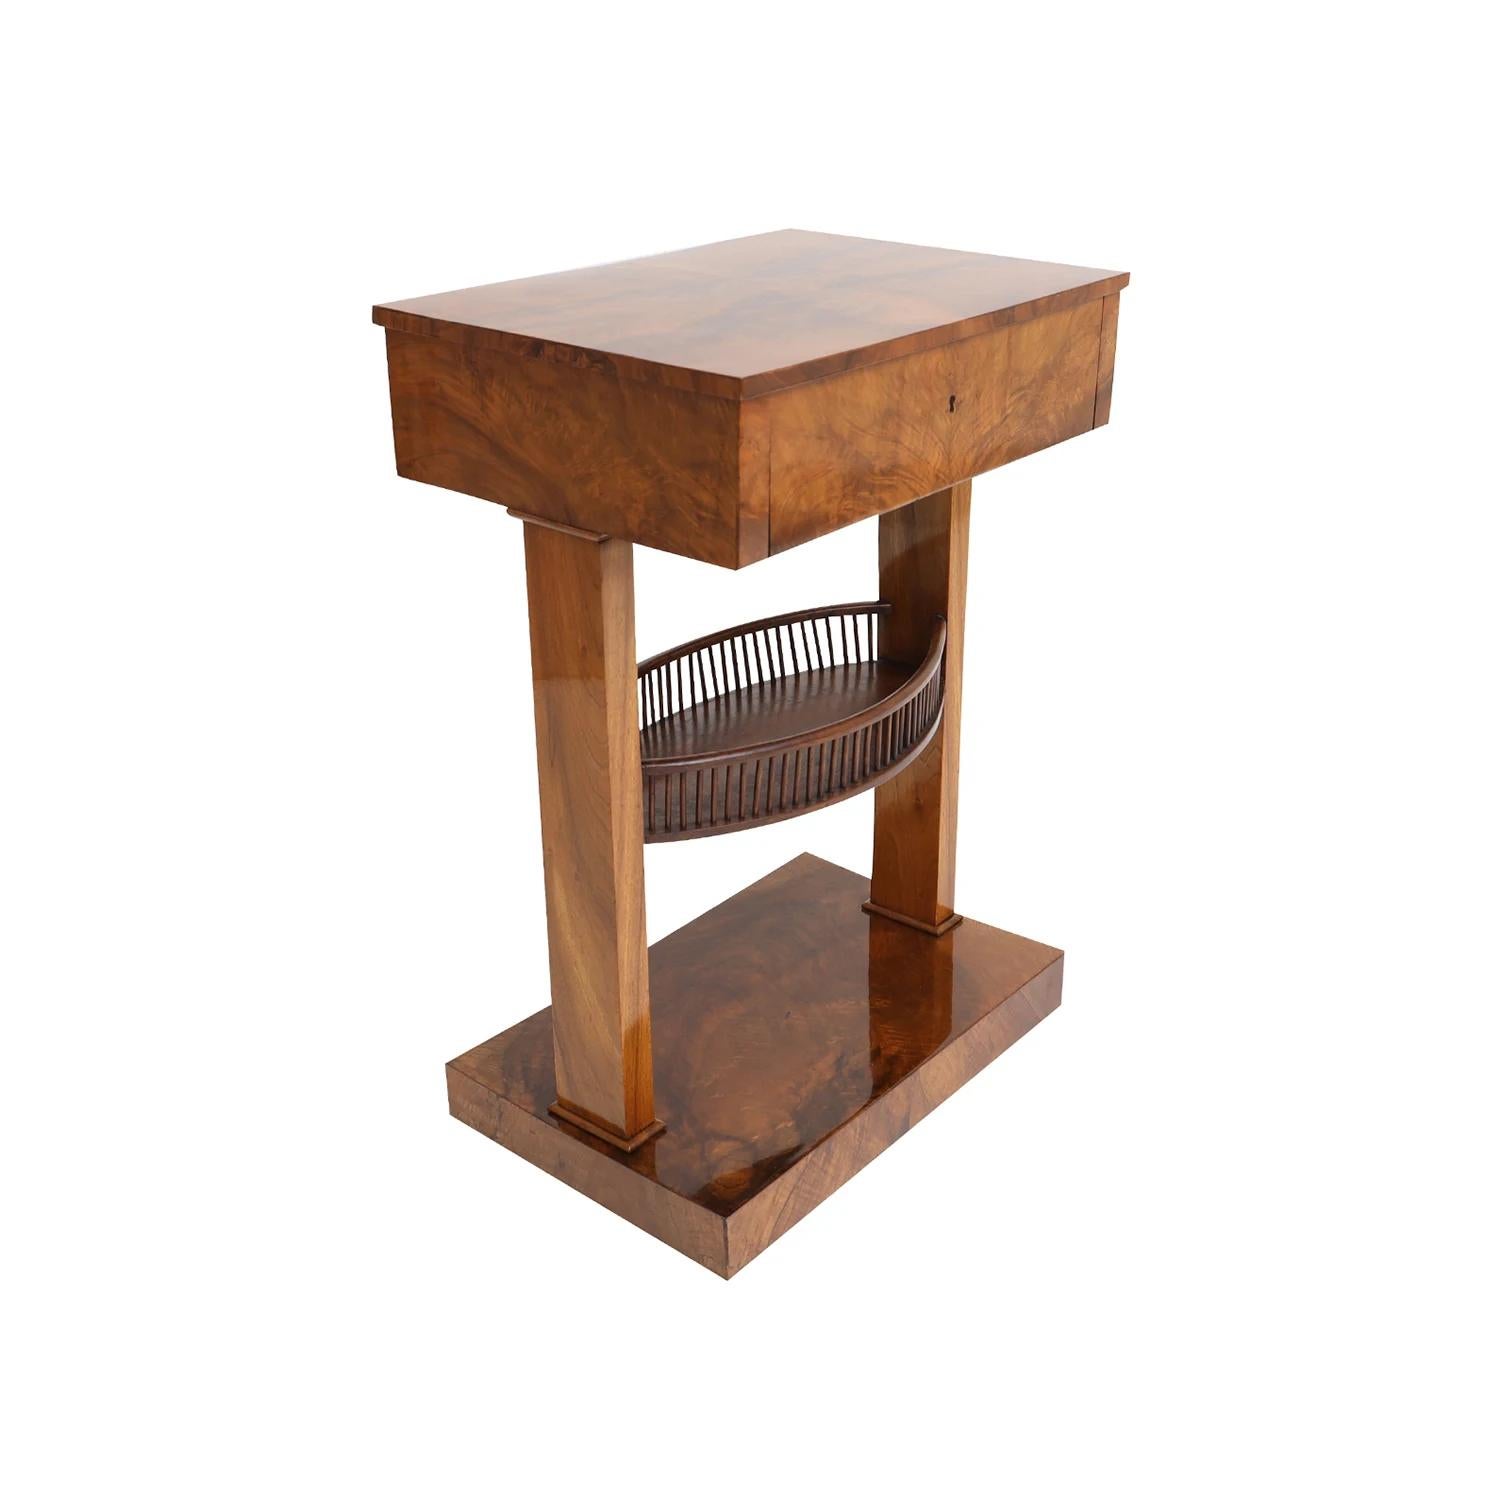 Hand-Carved 19th Century German Biedermeier Walnut Sewing Table - Antique Side Table For Sale